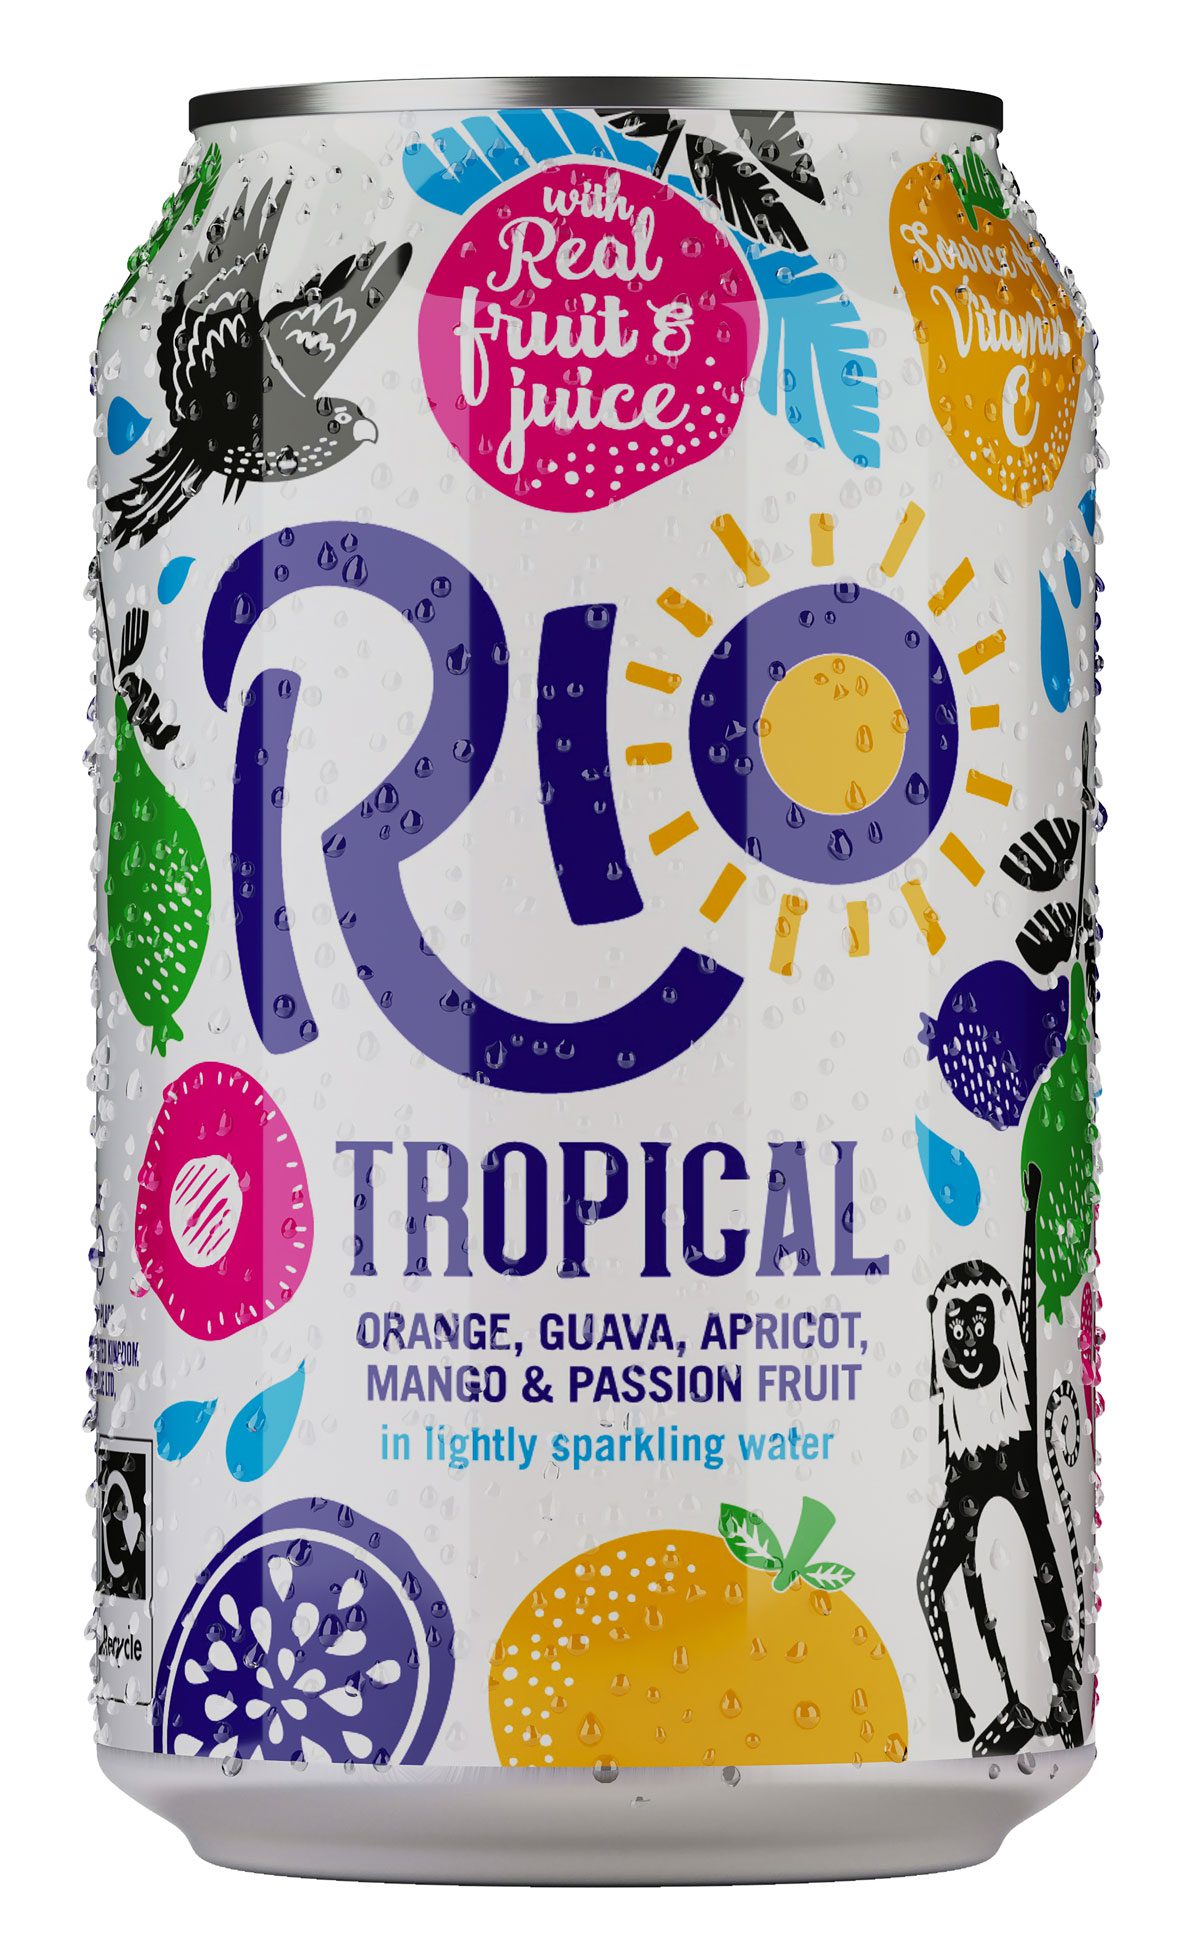 Boost Drinks has shouted out its Rio Tropical variants.